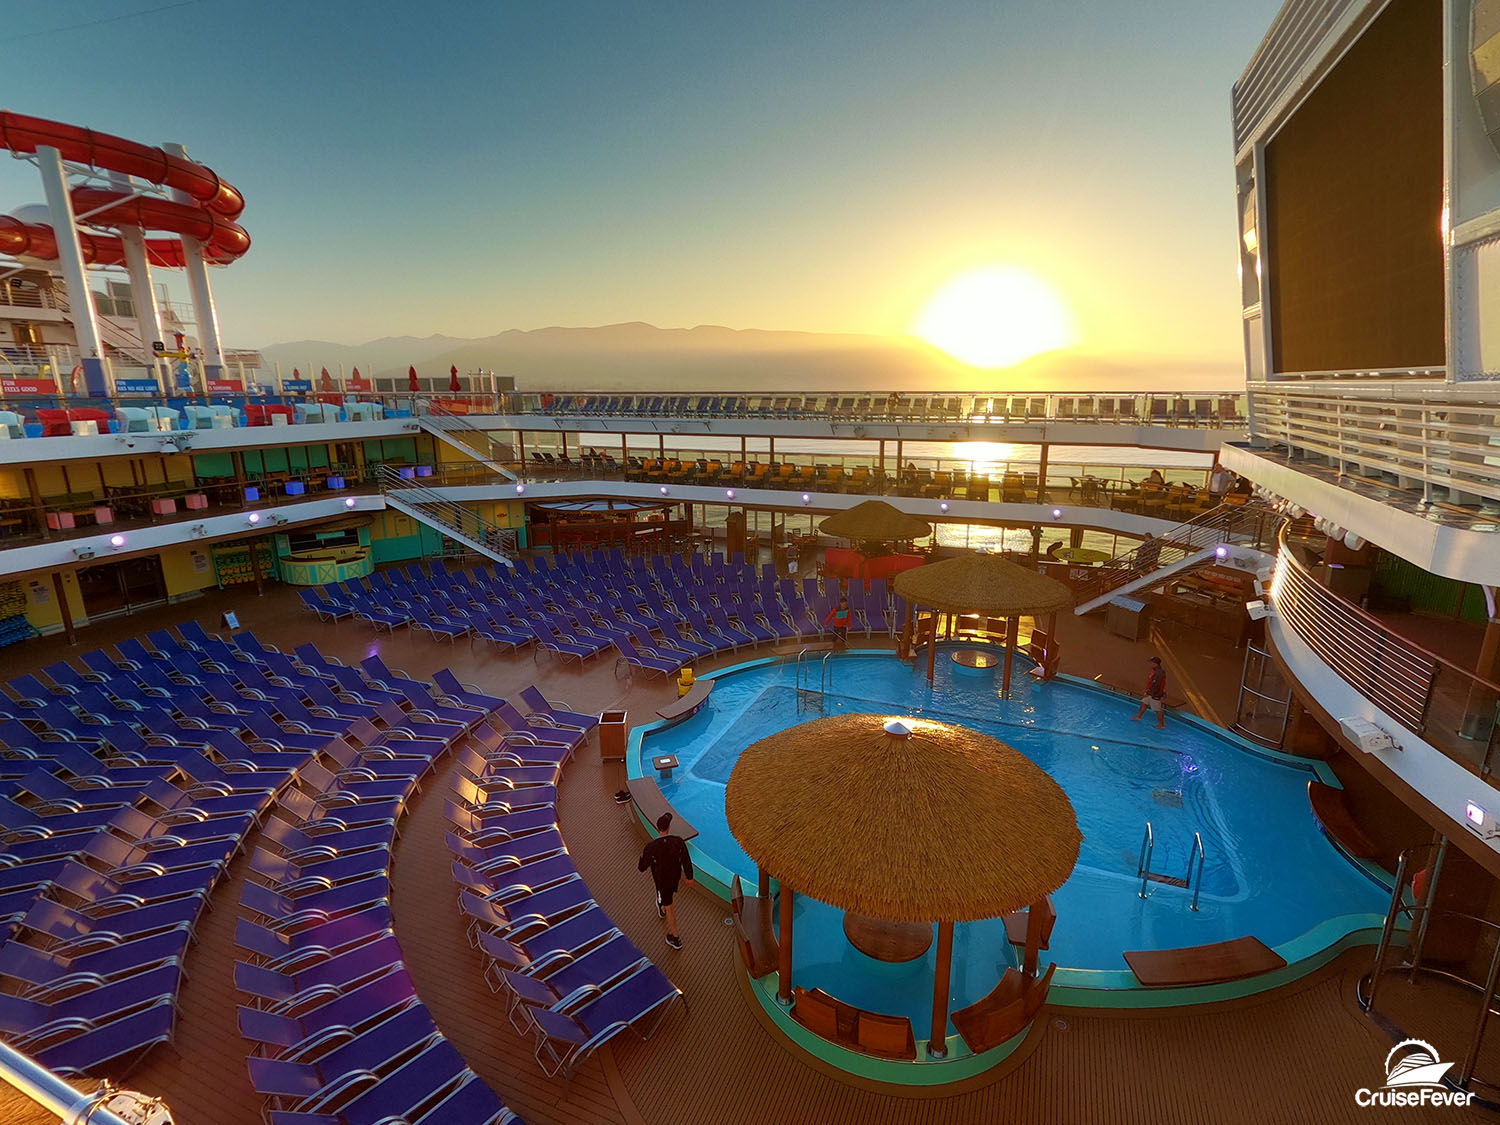 Why Carnival Panorama is the Most Fun Ship at Sea